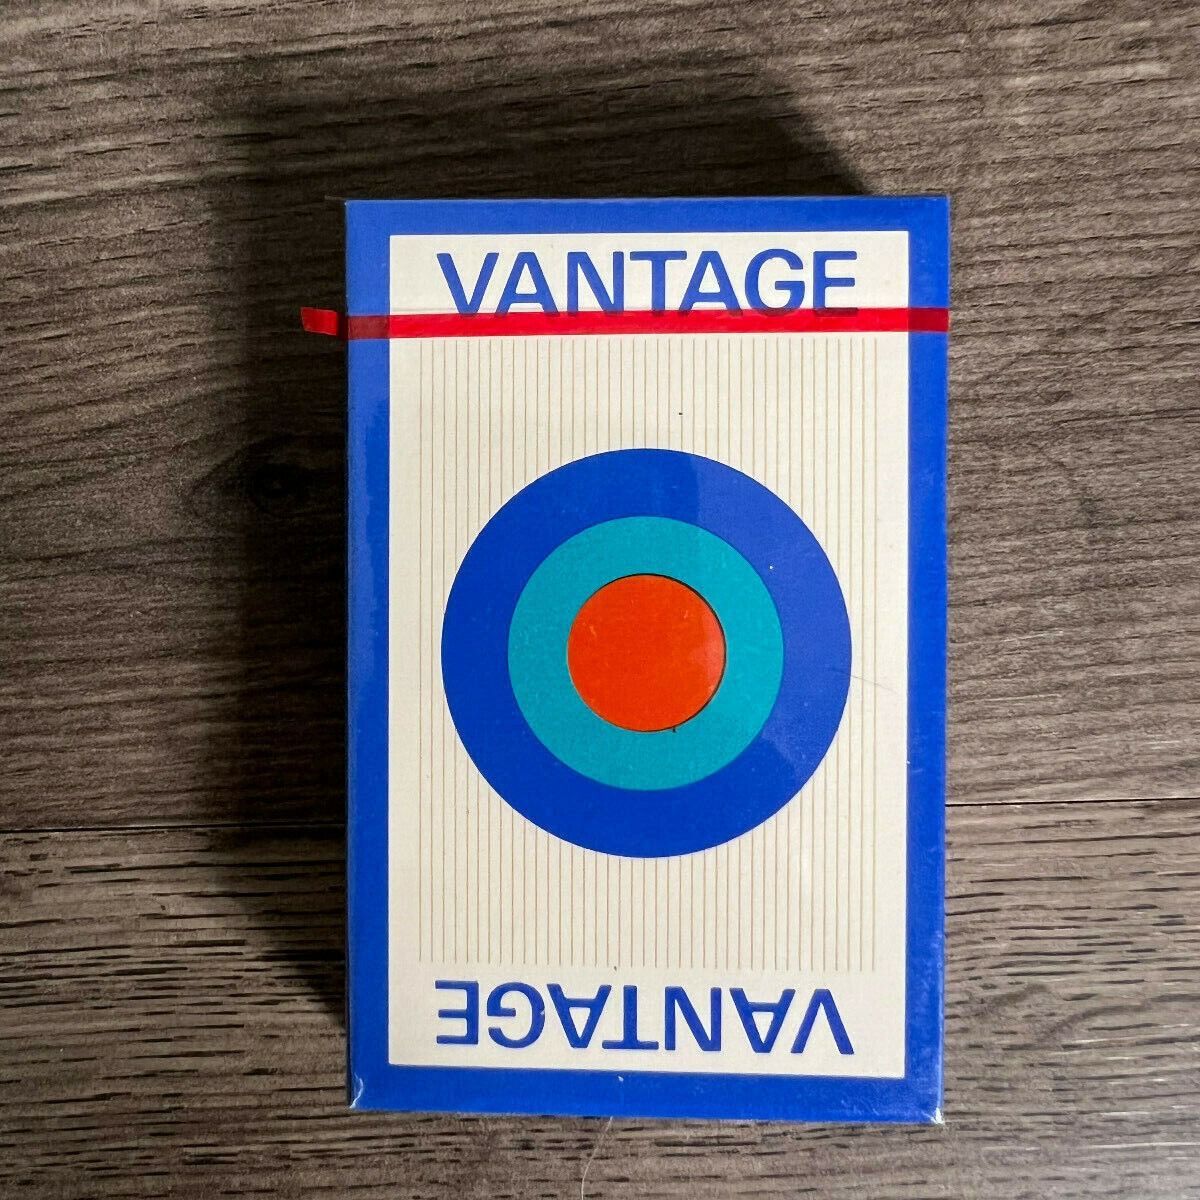 Vintage US Playing Card Company - Vantage Cigarettes Playing Cards - New/Sealed